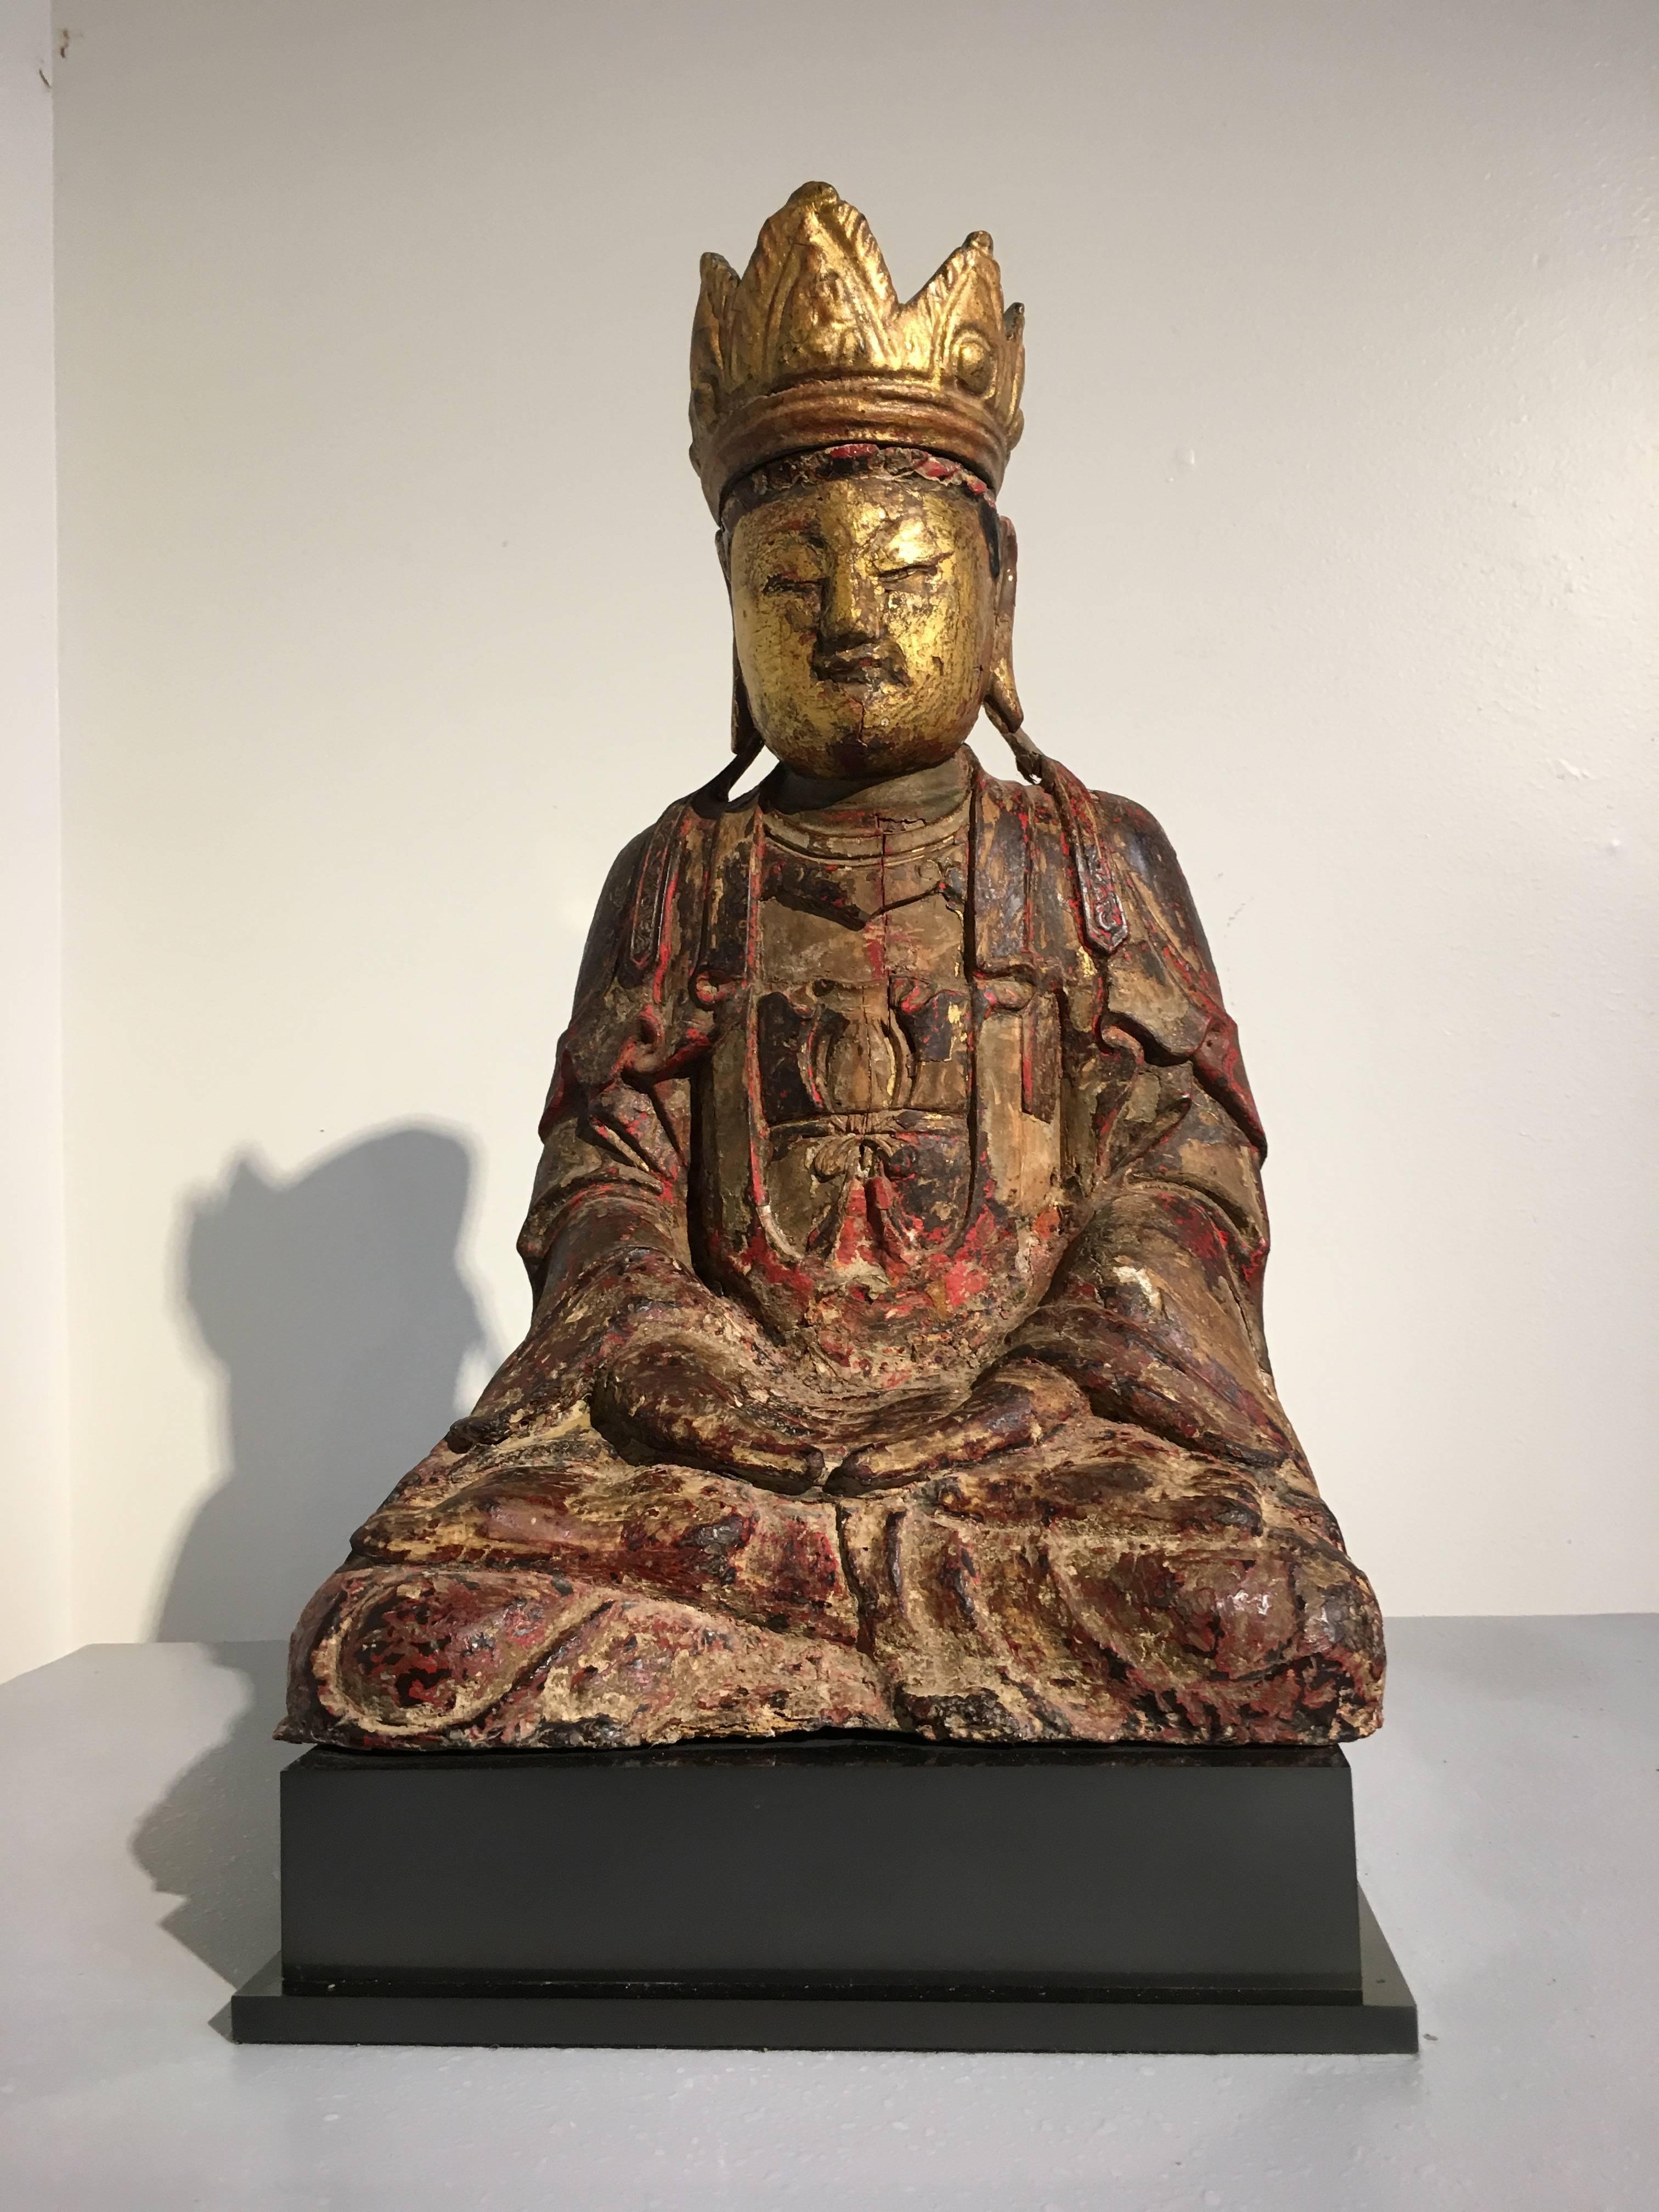 A beautiful and serene Chinese Ming dynasty carved wood figure of the Buddha Amitayus, the Buddha of long life, and a form of Amitabha Buddha. He is seated in dhyanassana, dressed in loose fitting robes, and adorned with a five pointed crown and